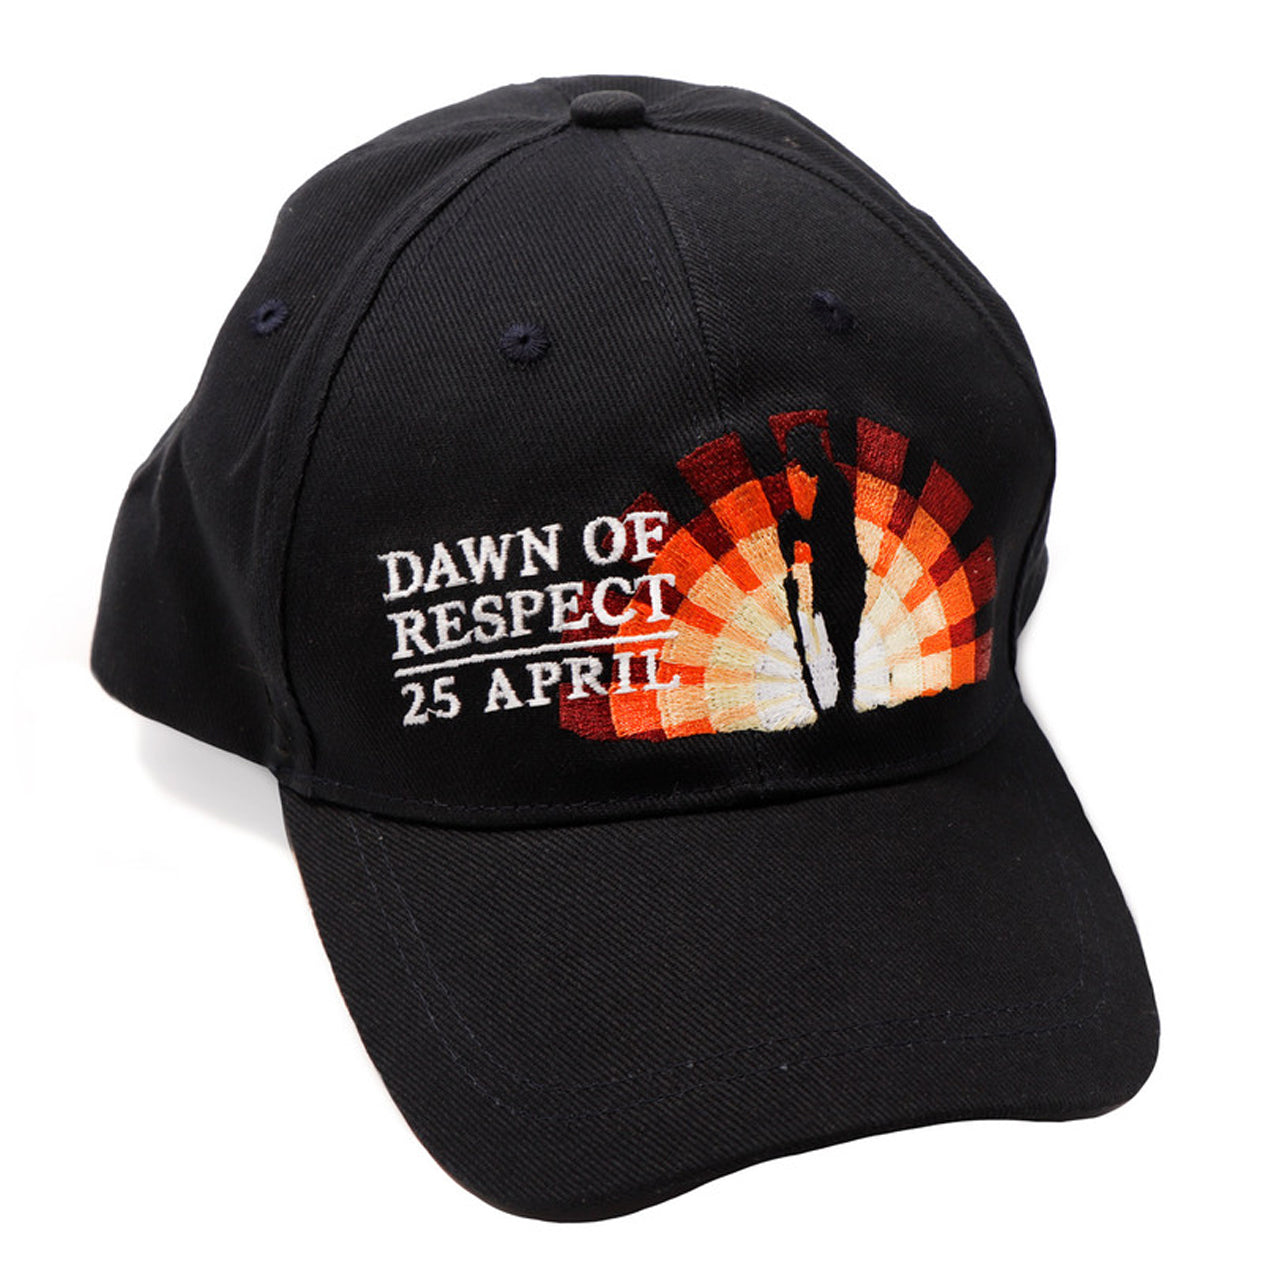 A special Dawn of Respect Cap featuring beautiful artwork honouring the service of Australians from all walks of life. www.moralepatches.com.au